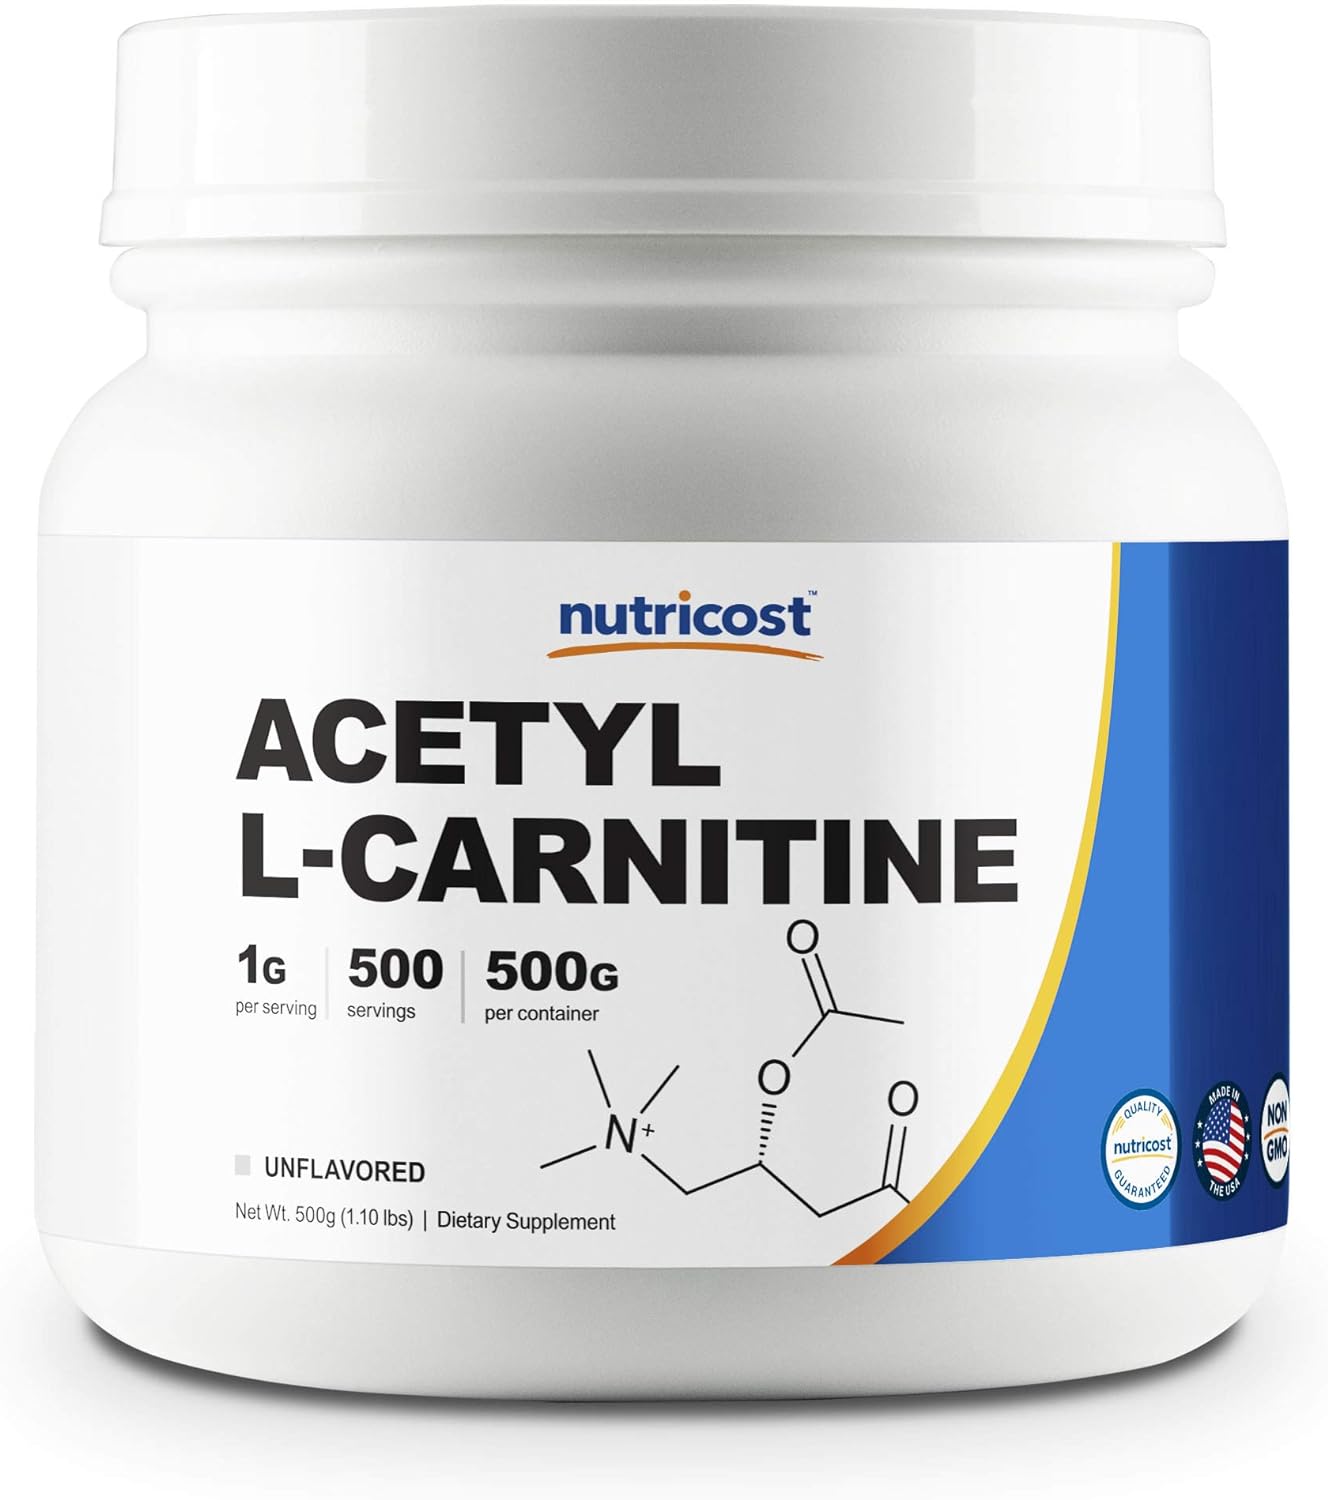 Nutricost Acetyl L-Carnitine (ALCAR) 500 Grams - 1000mg Per Serving - High Quality Pure Acetyl L-Car